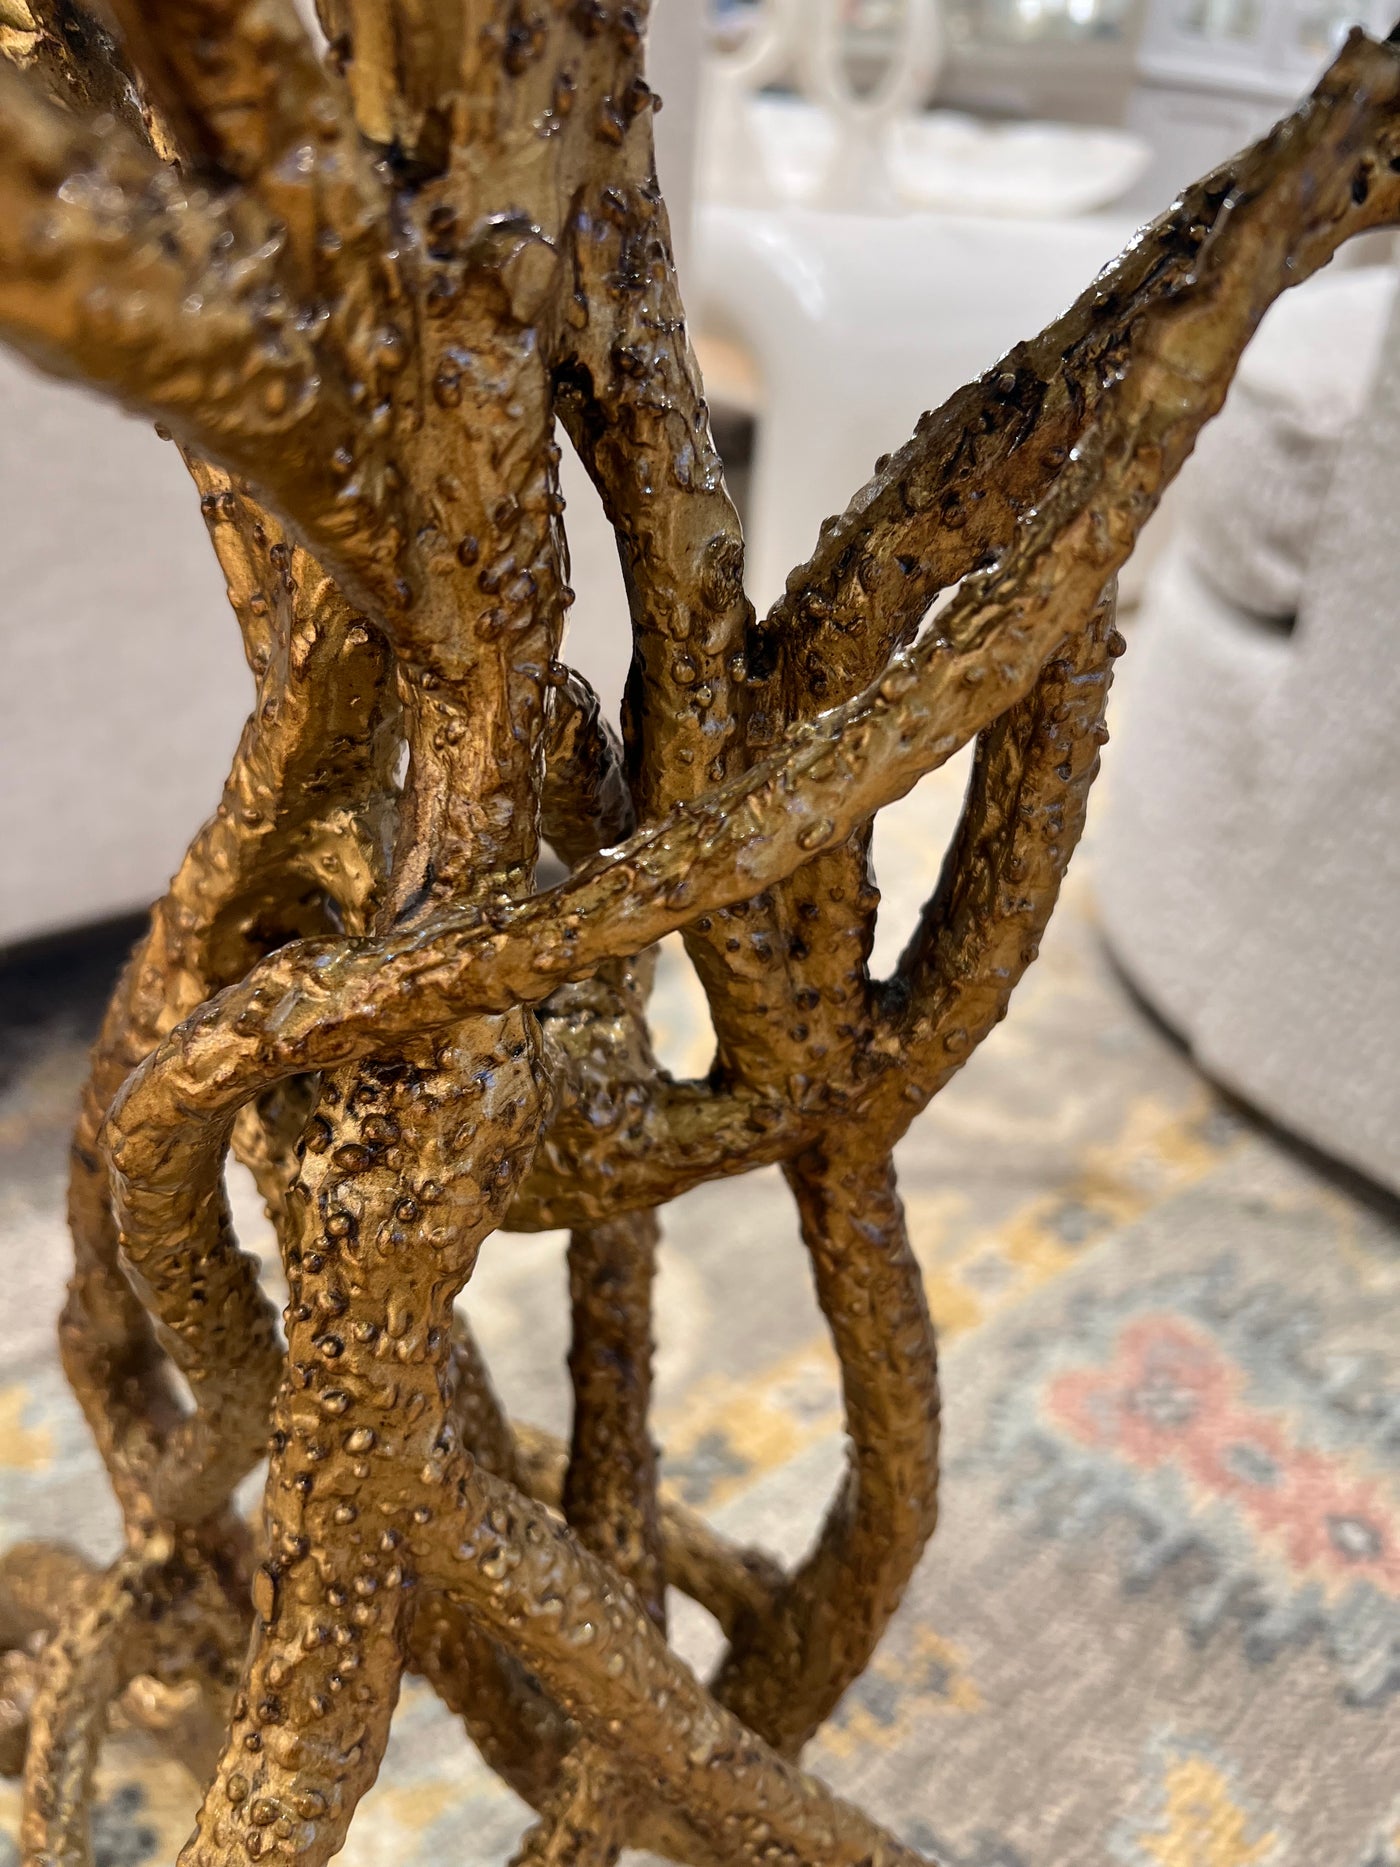 TABLE GLASS WITH TWISTED GOLD BRANCH